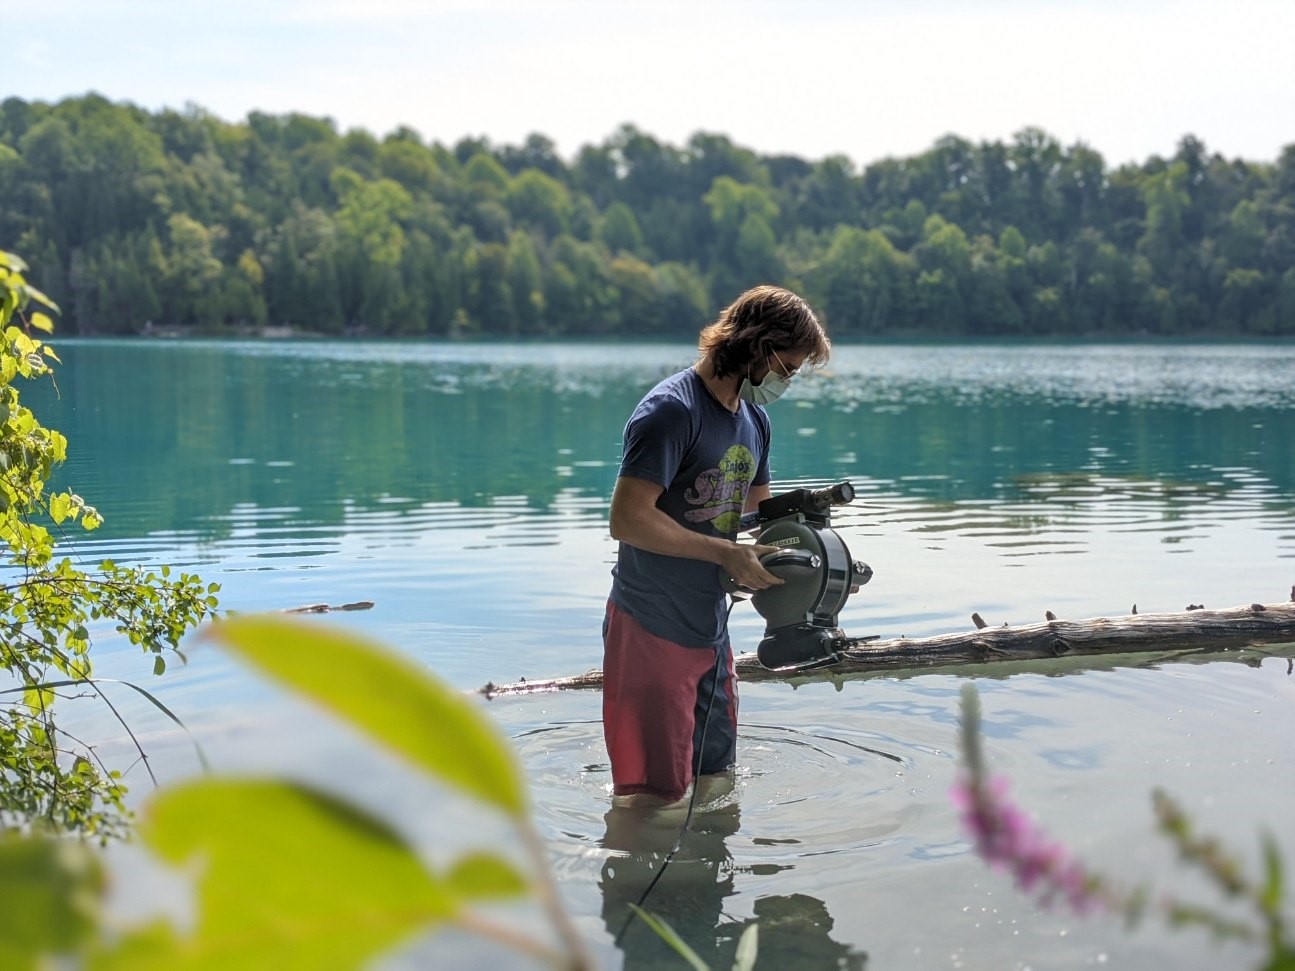 Geological sciences doctoral candidate Kristian Olson in Green Lakes, NY, conducting research with ARCHIE, the department's submersible drone.